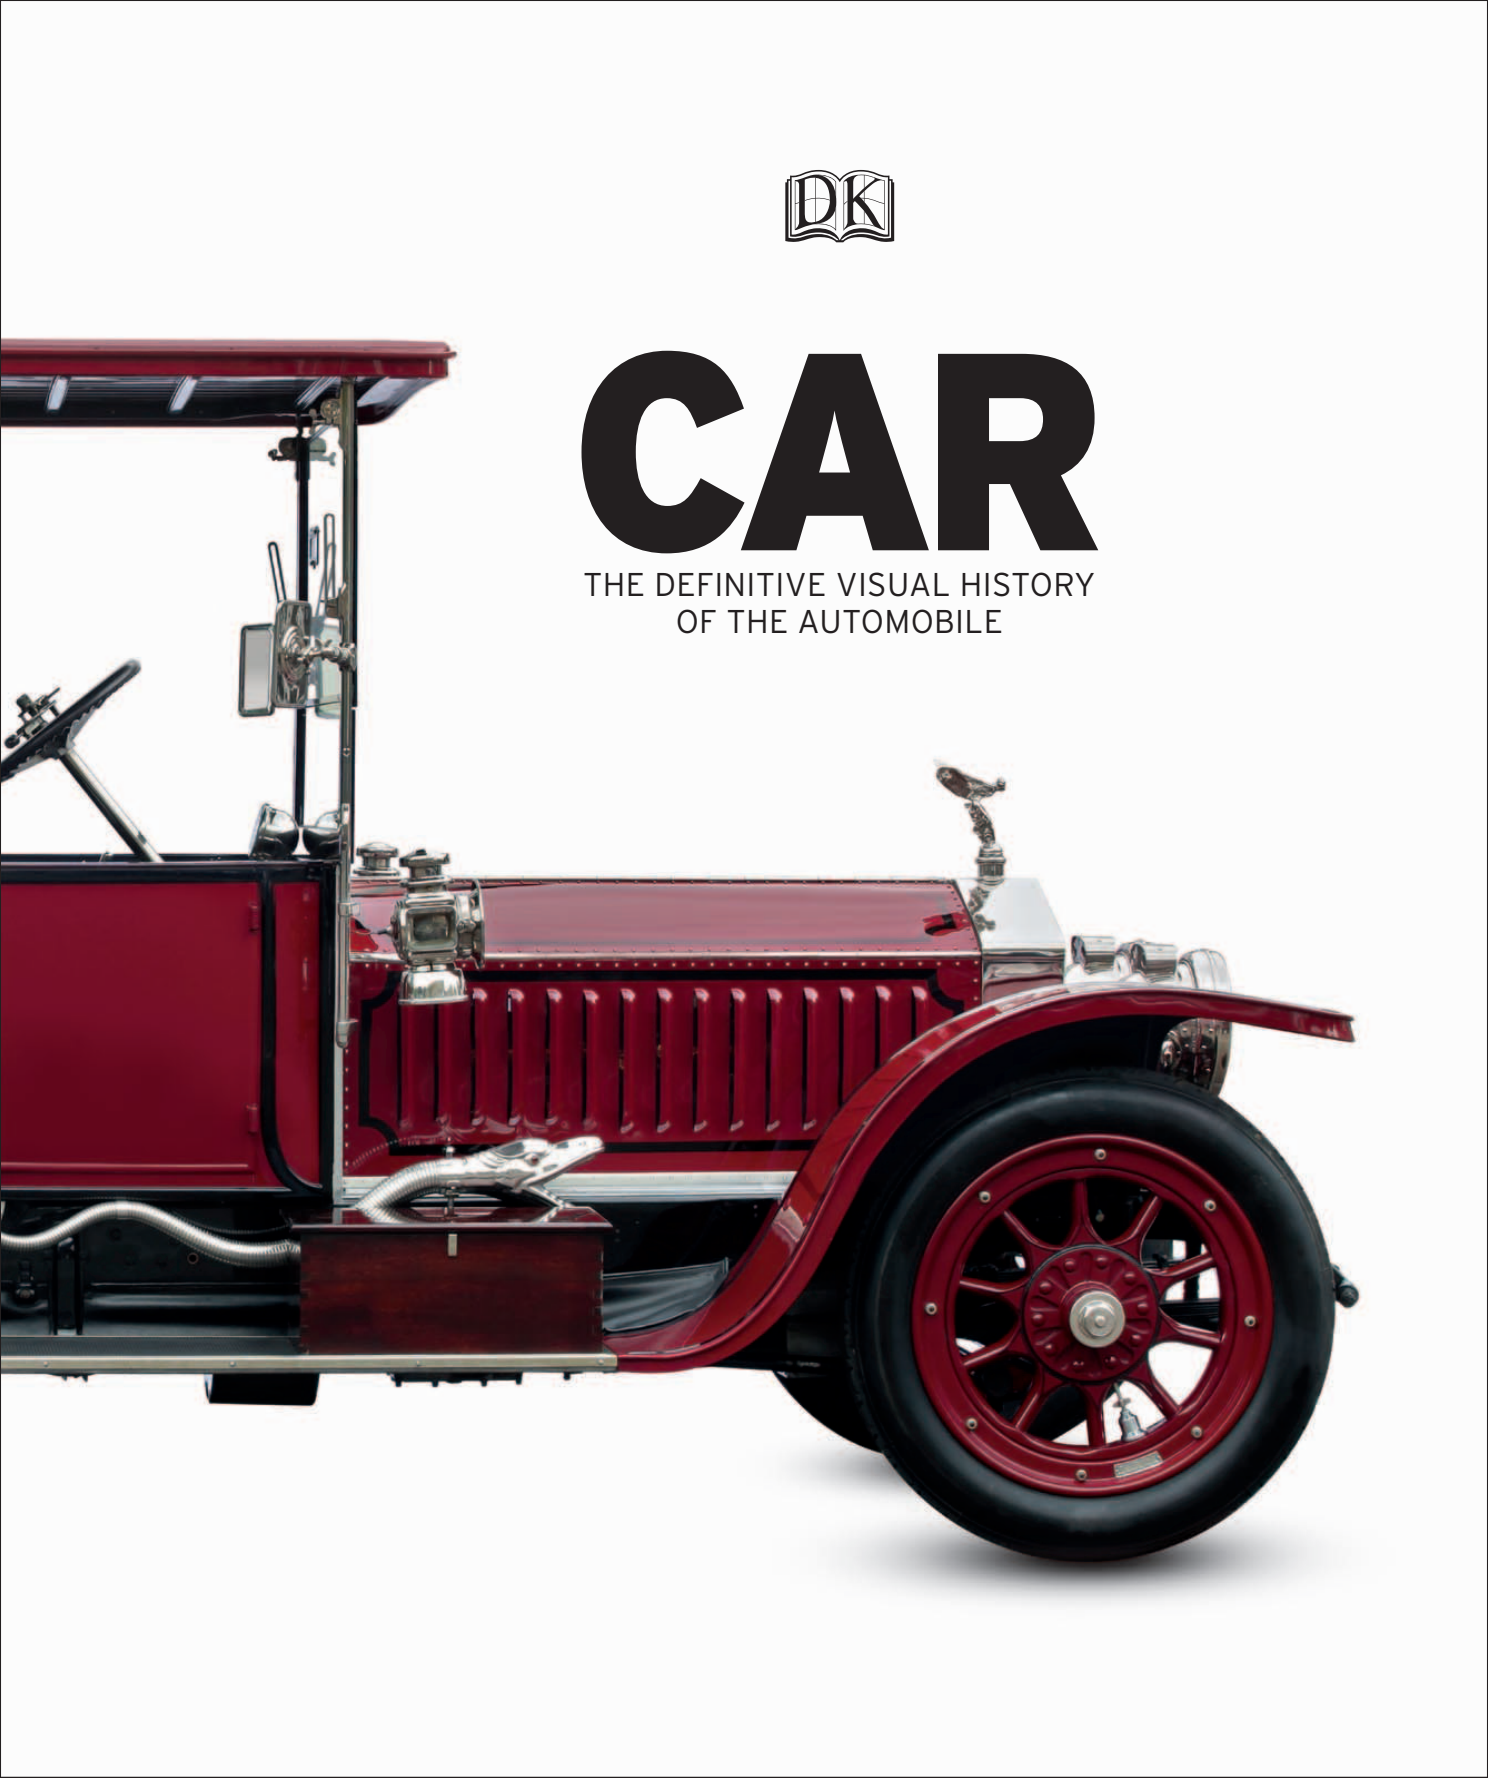 Car%20-%20The%20Definitive%20Visual%20History%20of%20the%20Automobile_005.png